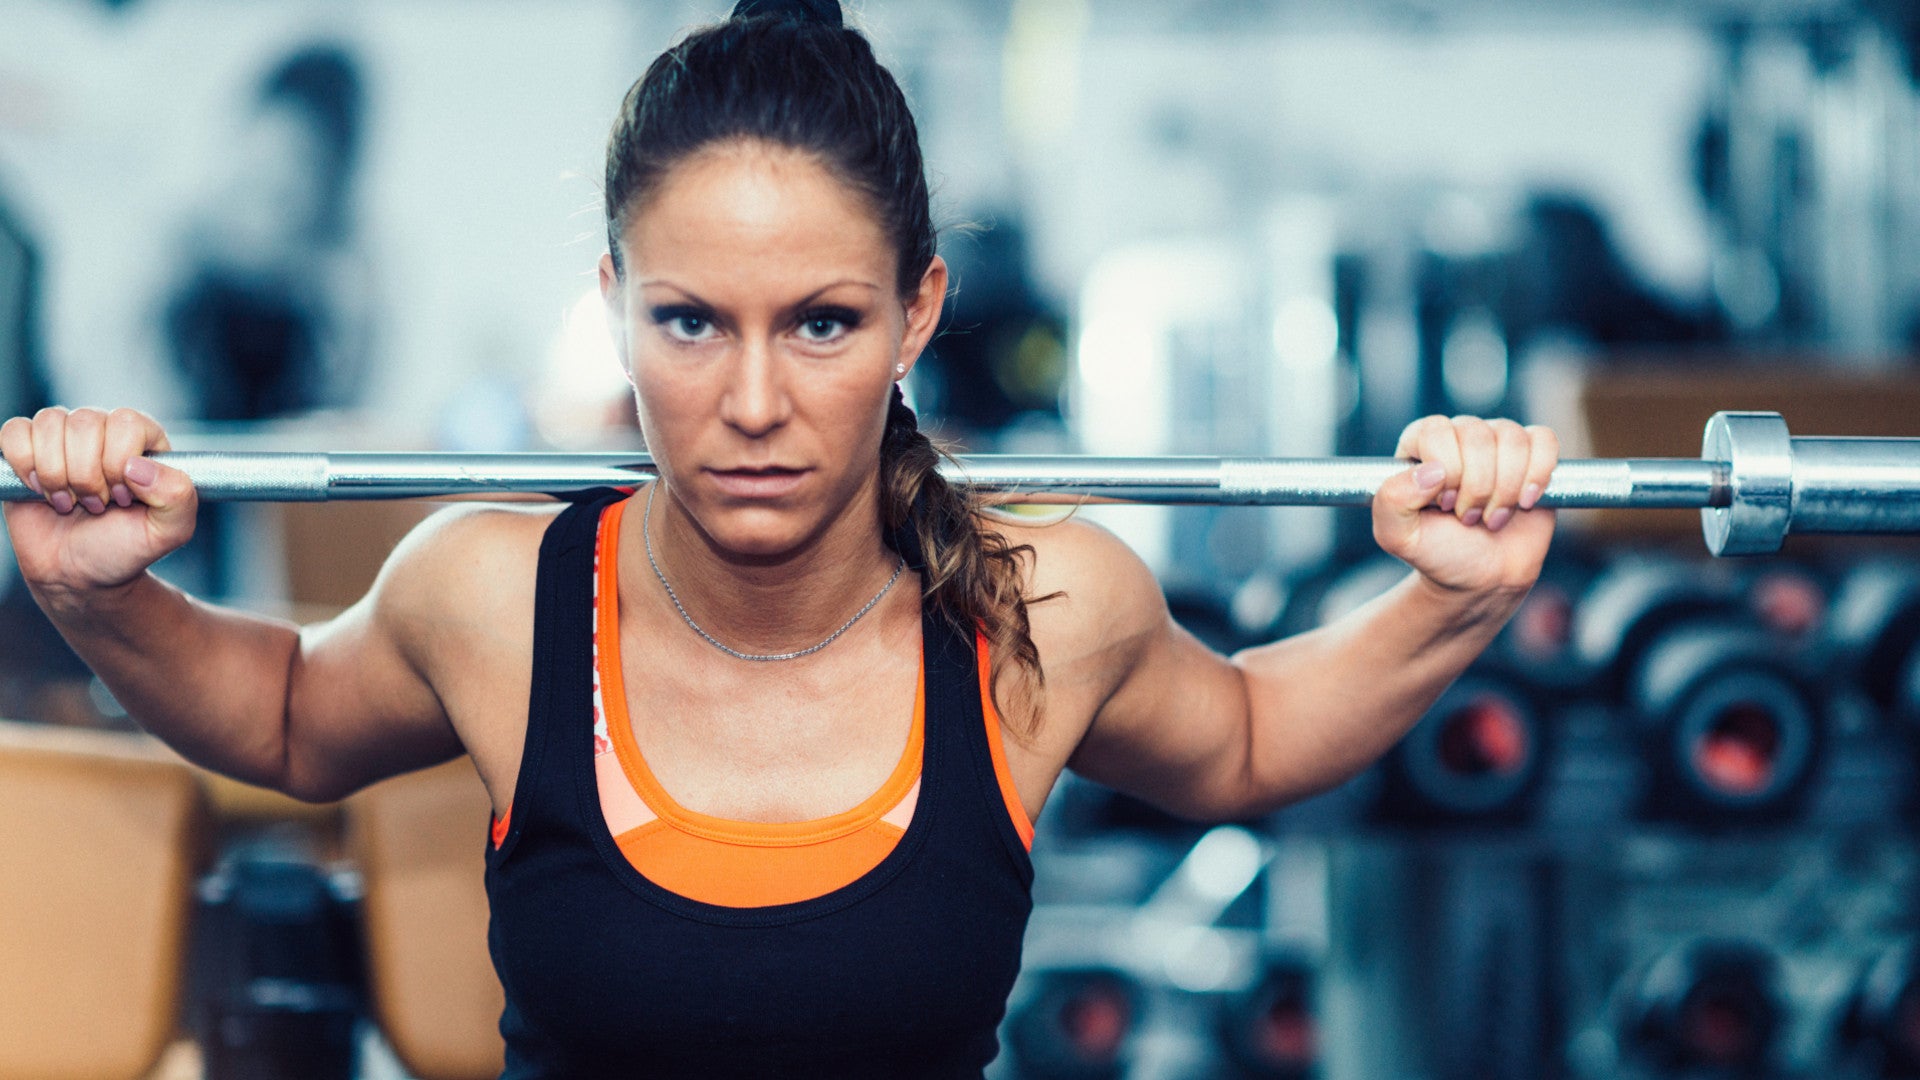 The Best Workout Plans for Women to Get Stronger